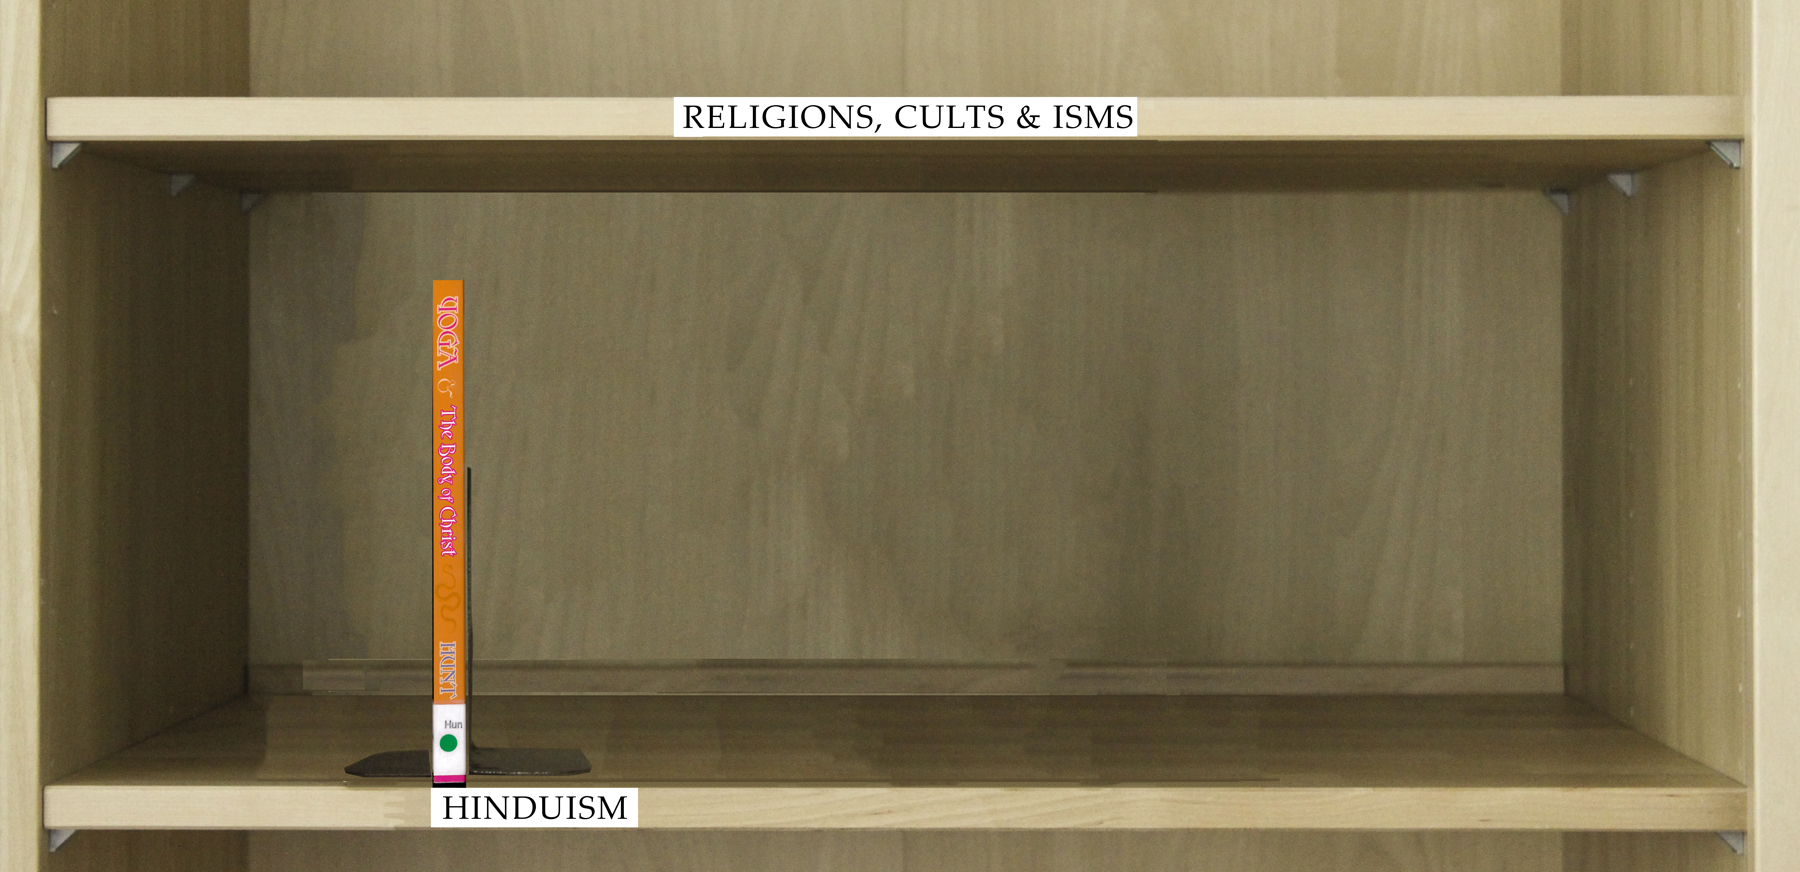 Index of Books Under the Category Hinduism.